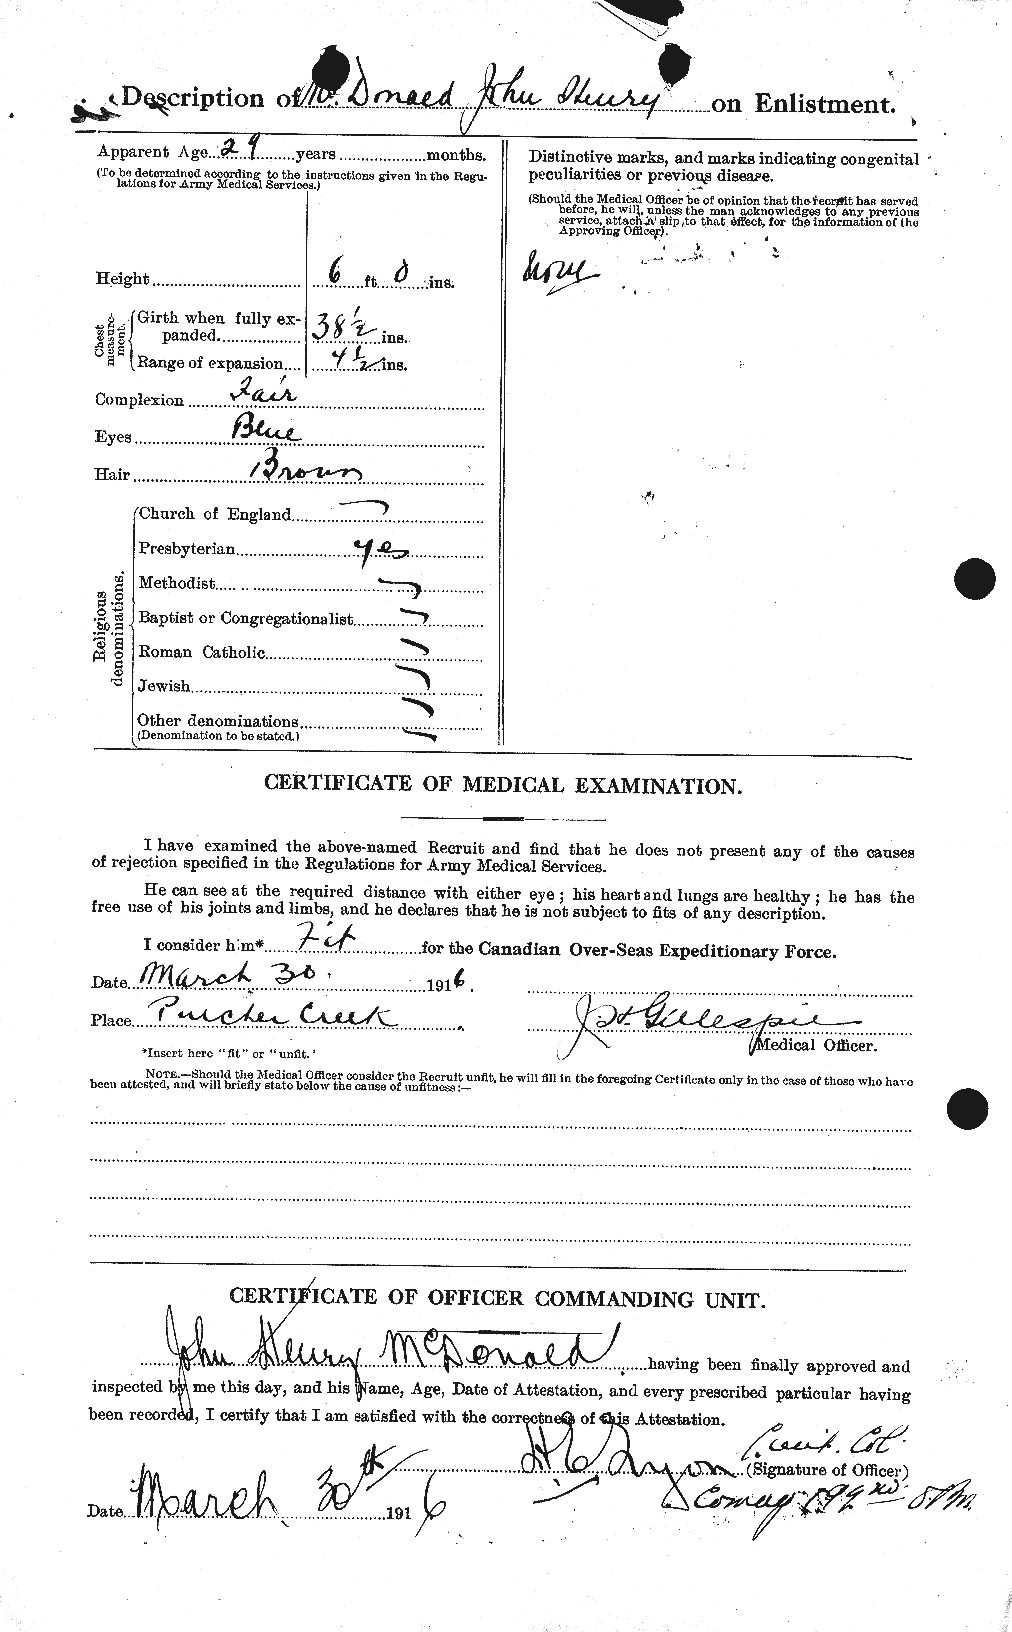 Personnel Records of the First World War - CEF 519479b